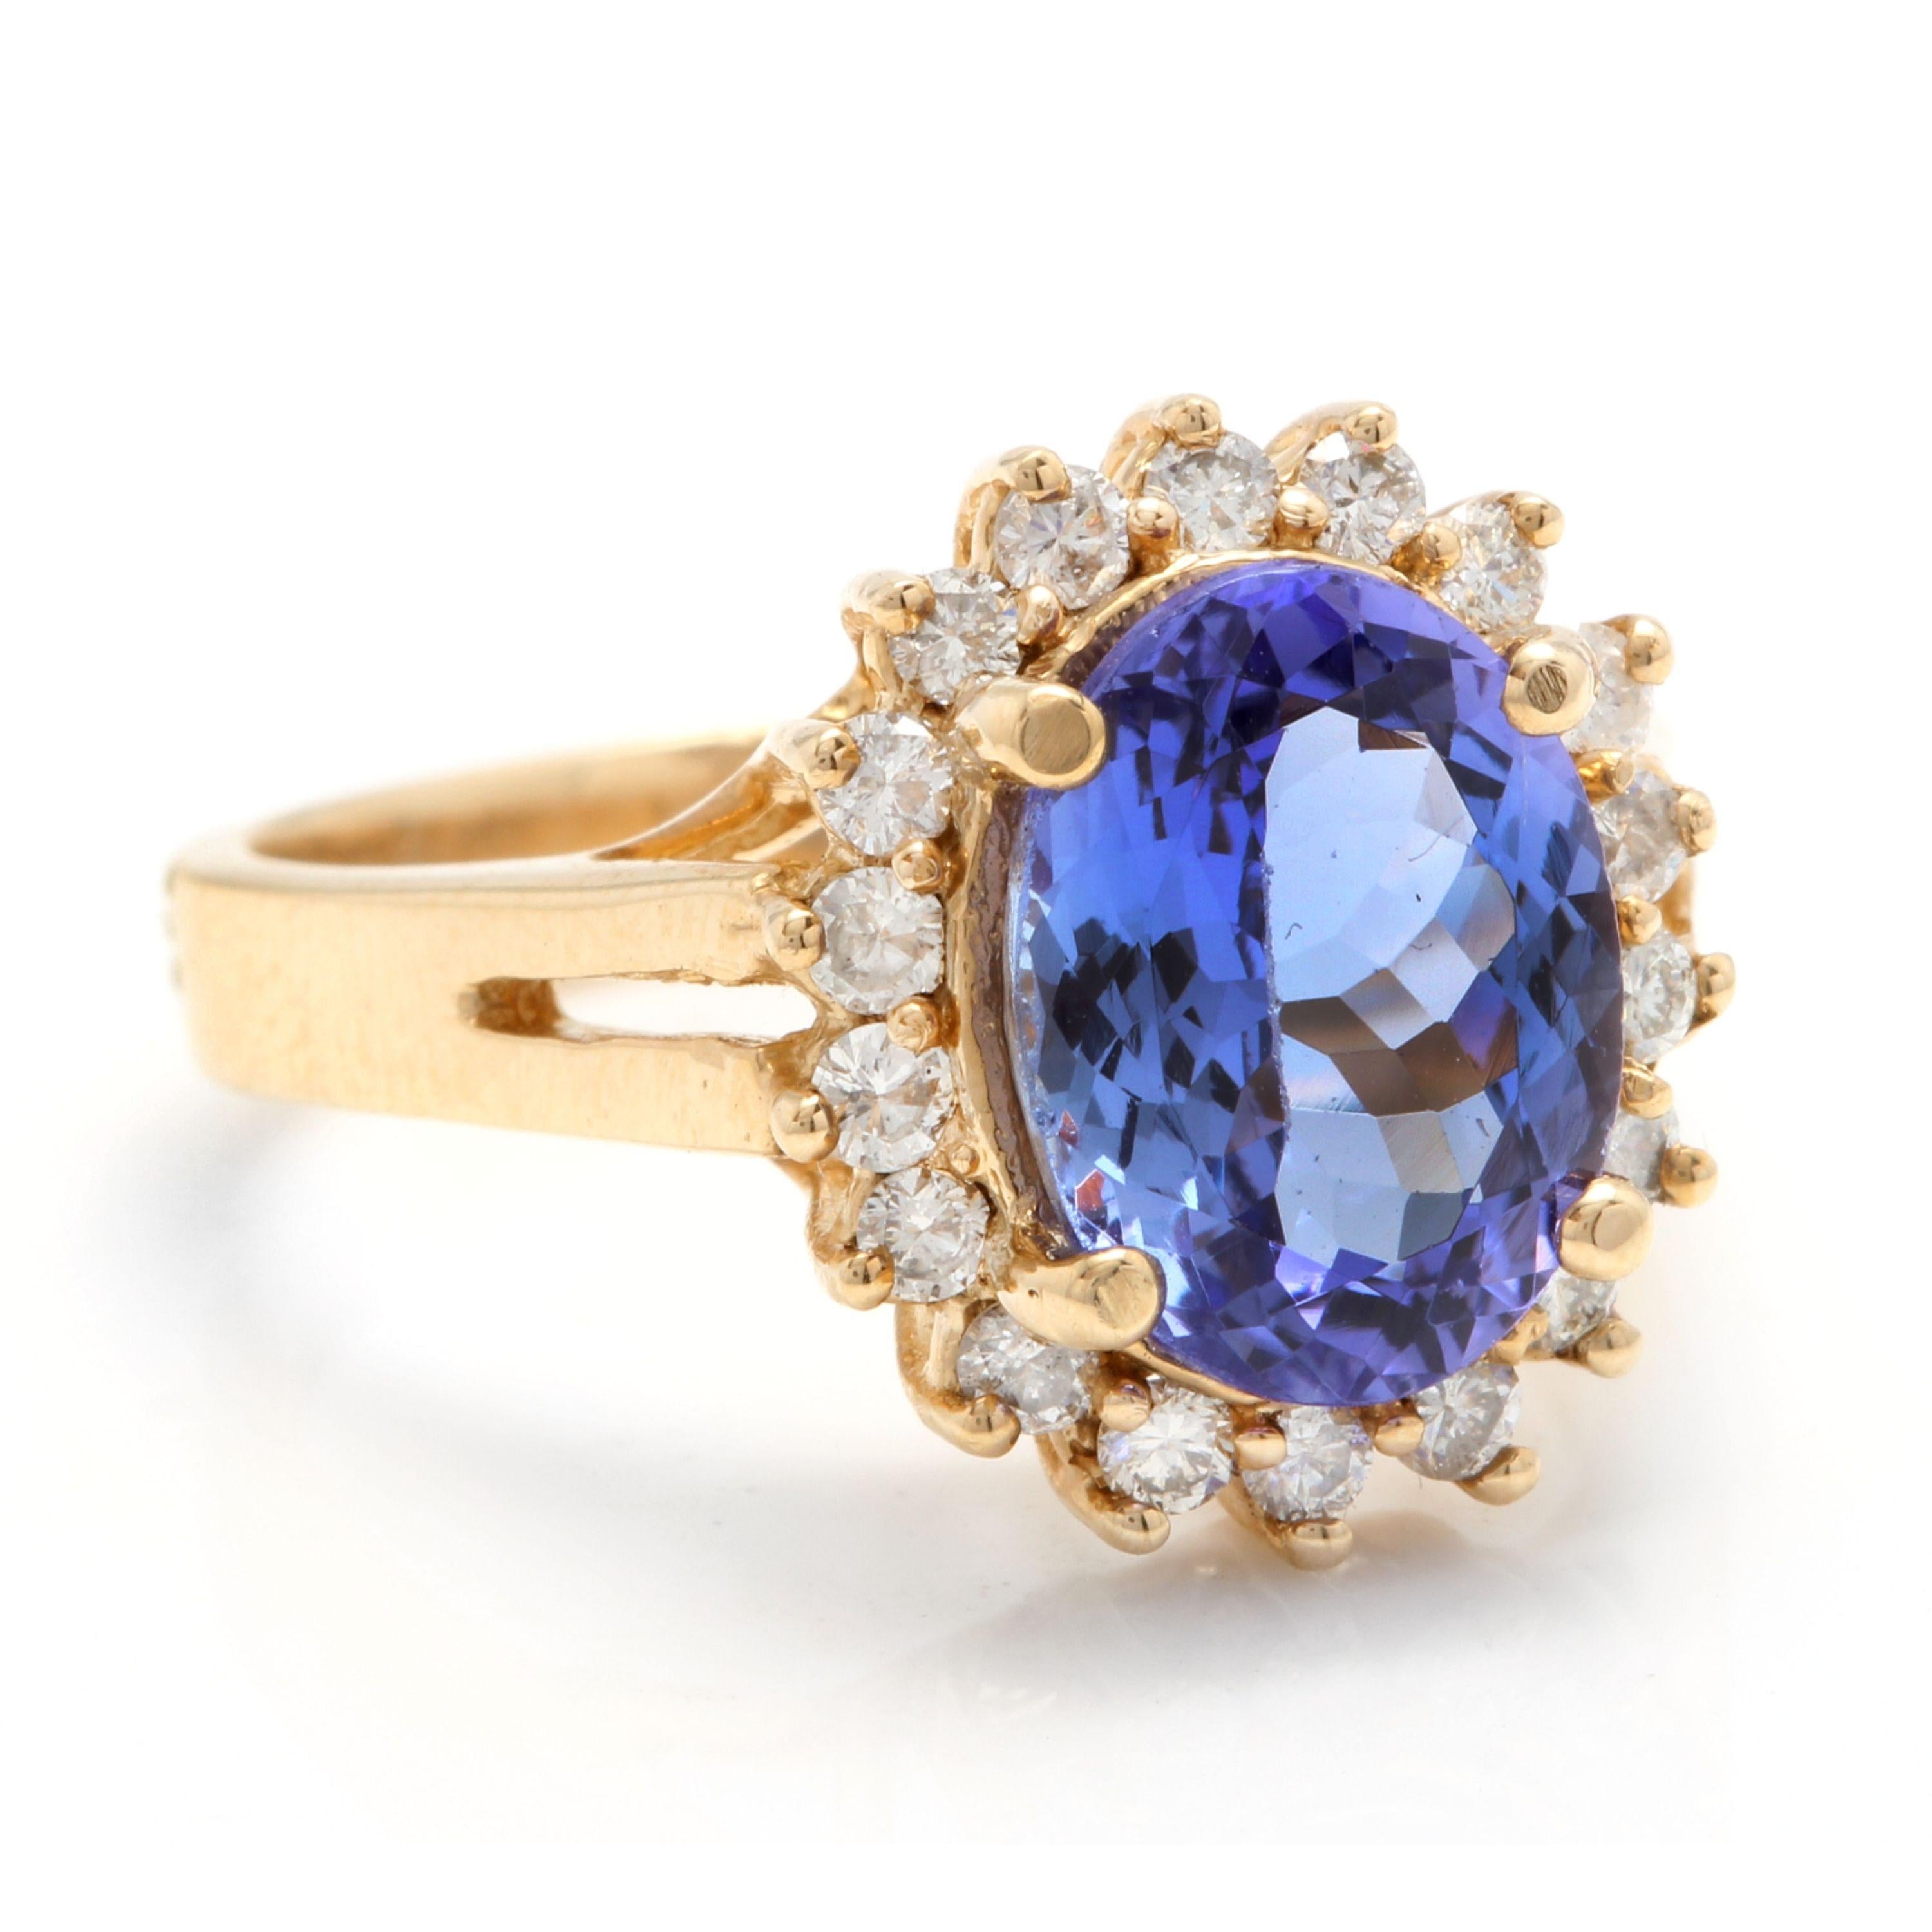 4.10 Carats Natural Very Nice Looking Tanzanite and Diamond 14K Solid Yellow Gold Ring

Total Natural Oval Shaped Tanzanite Weight is: Approx. 3.50 Carats

Tanzanite Measures: Approx. 11.00 x 8.40mm

Natural Round Diamonds Weight: Approx. 0.60 Carat